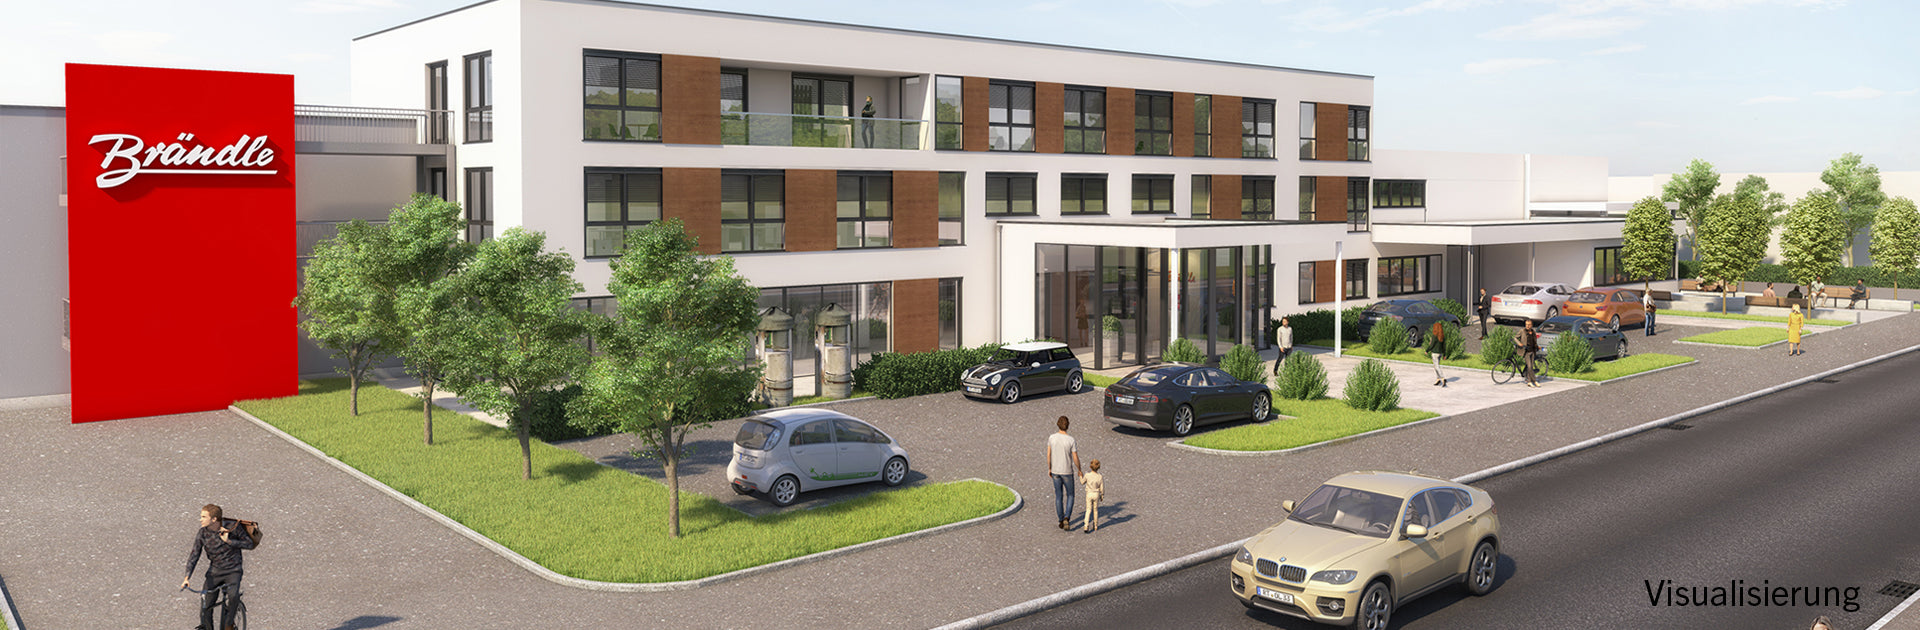 Photo of the visualized image of the new building: Brändle plant in Empfingen in the district of Freudenstadt